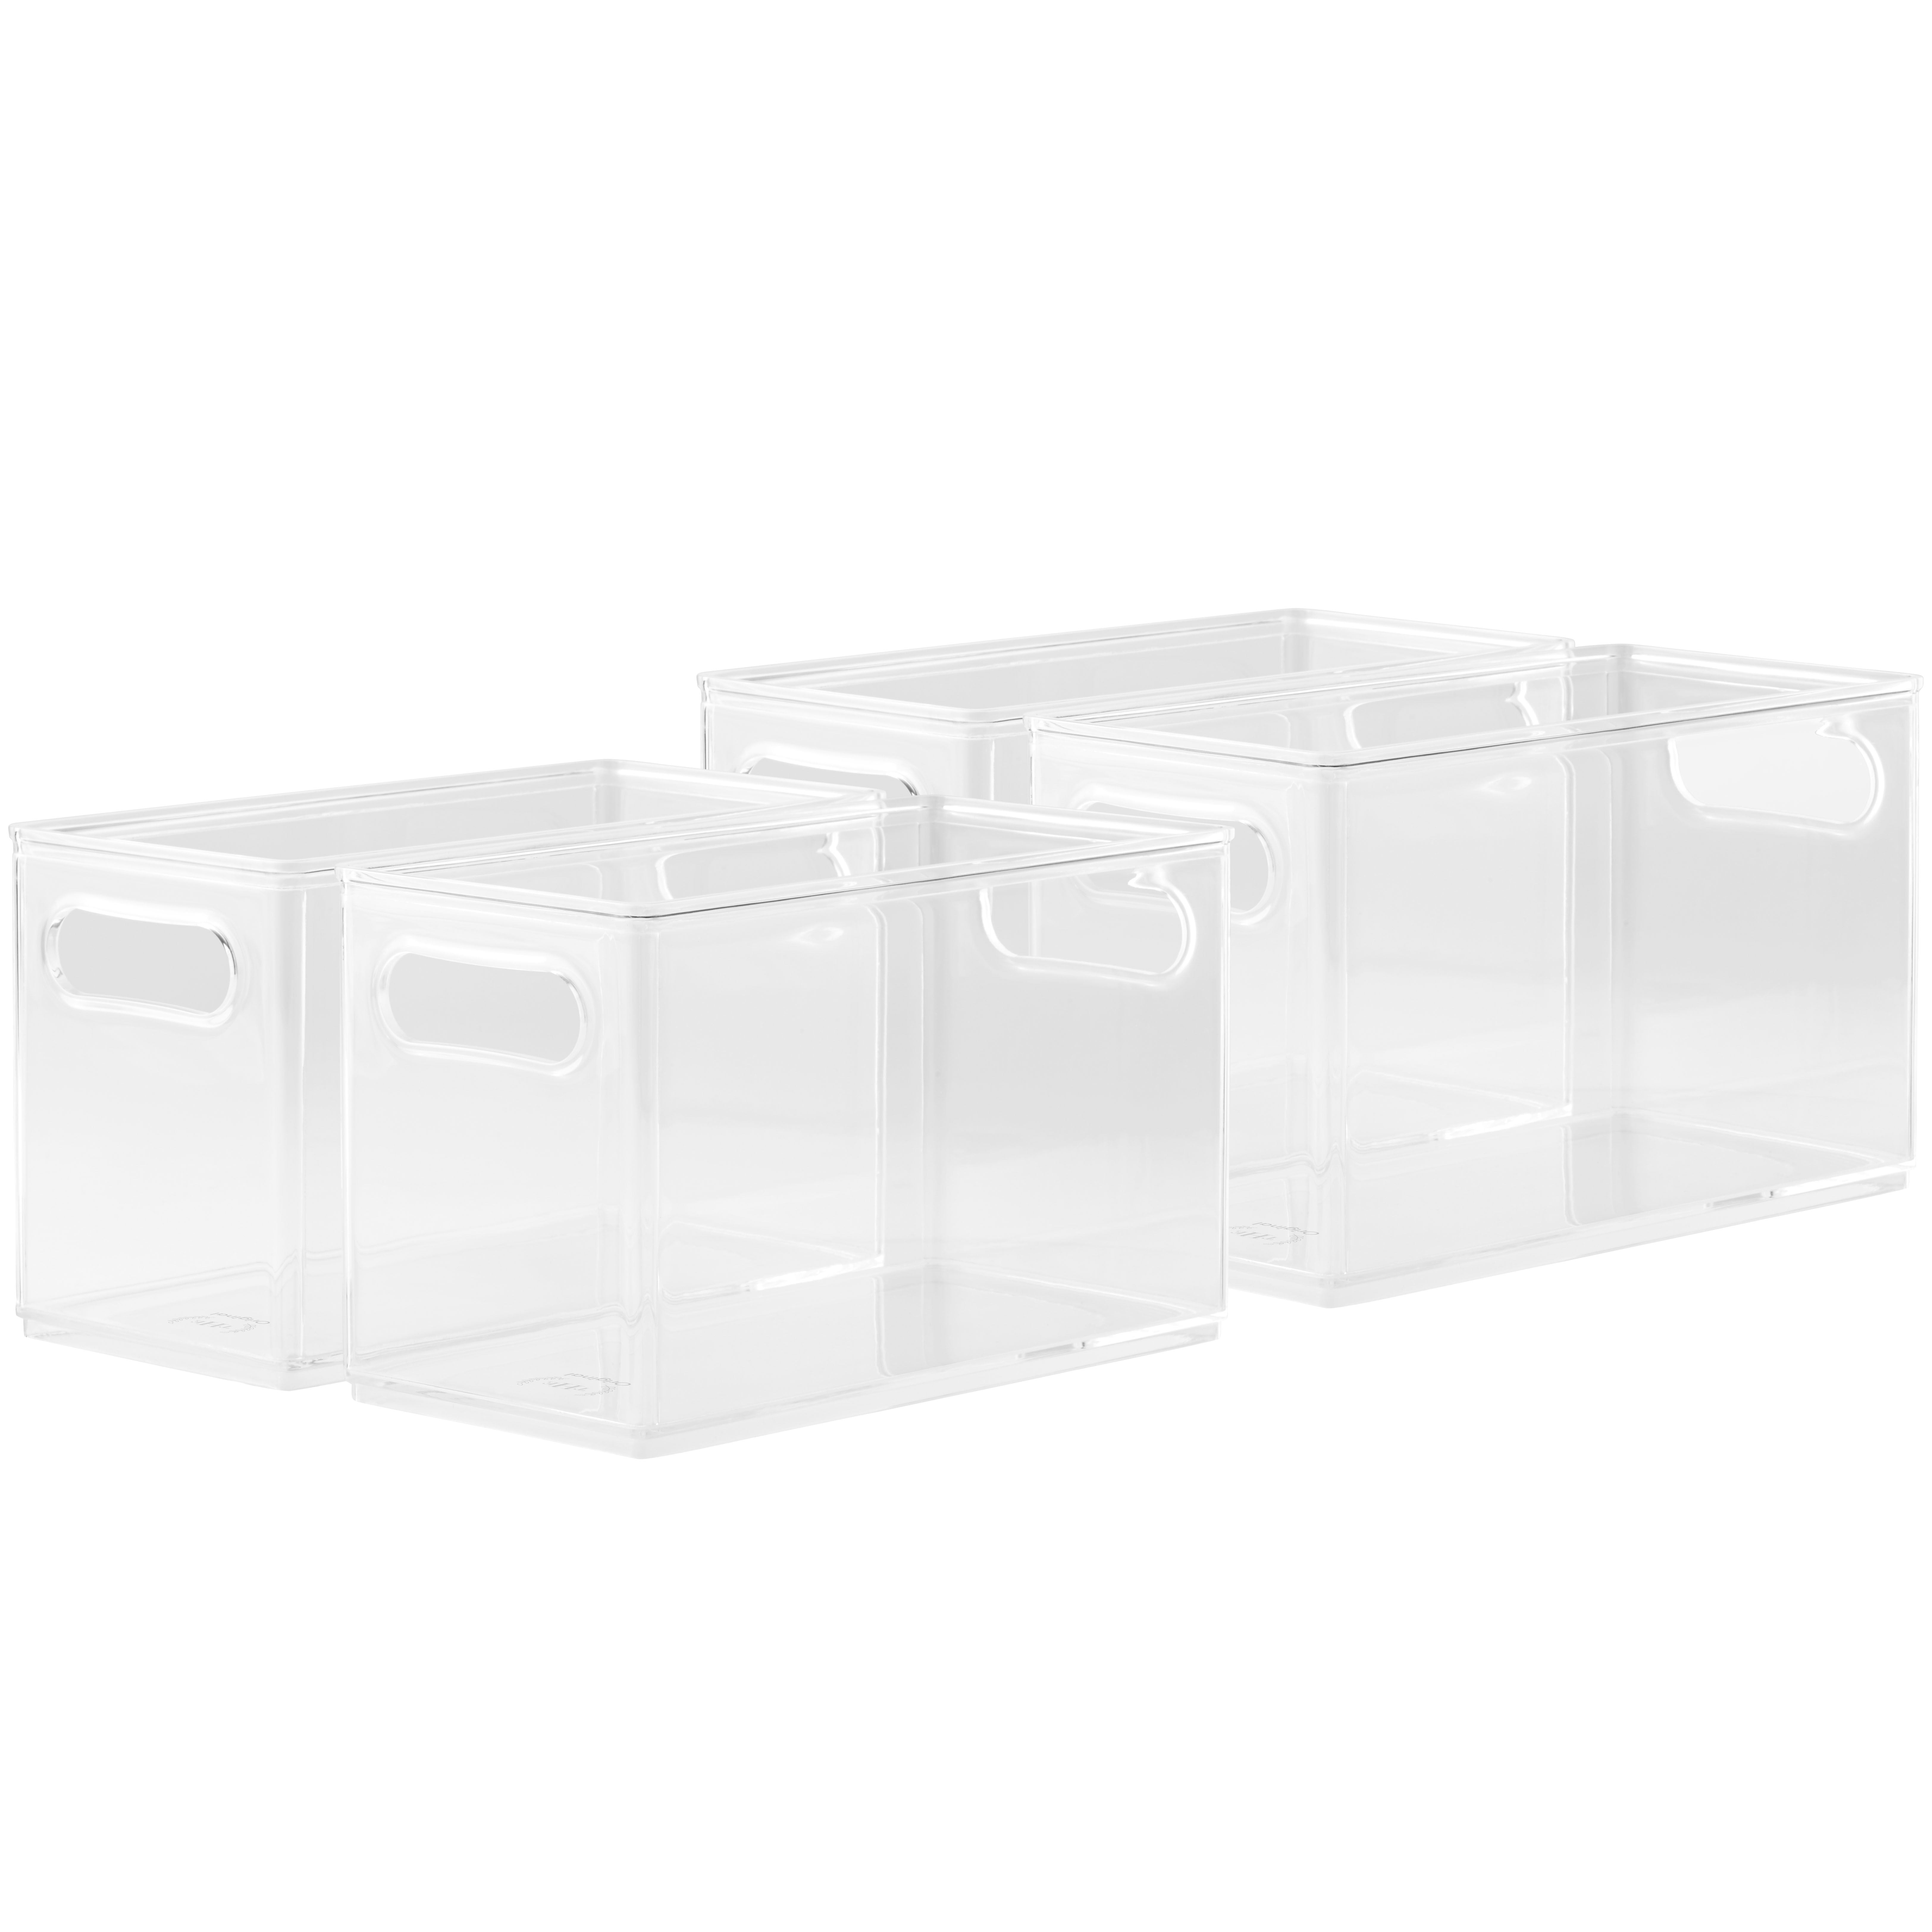 EAMAOTT Clear Plastic Storage Organizer Container Bins with Cutout Handles,  4Pcs